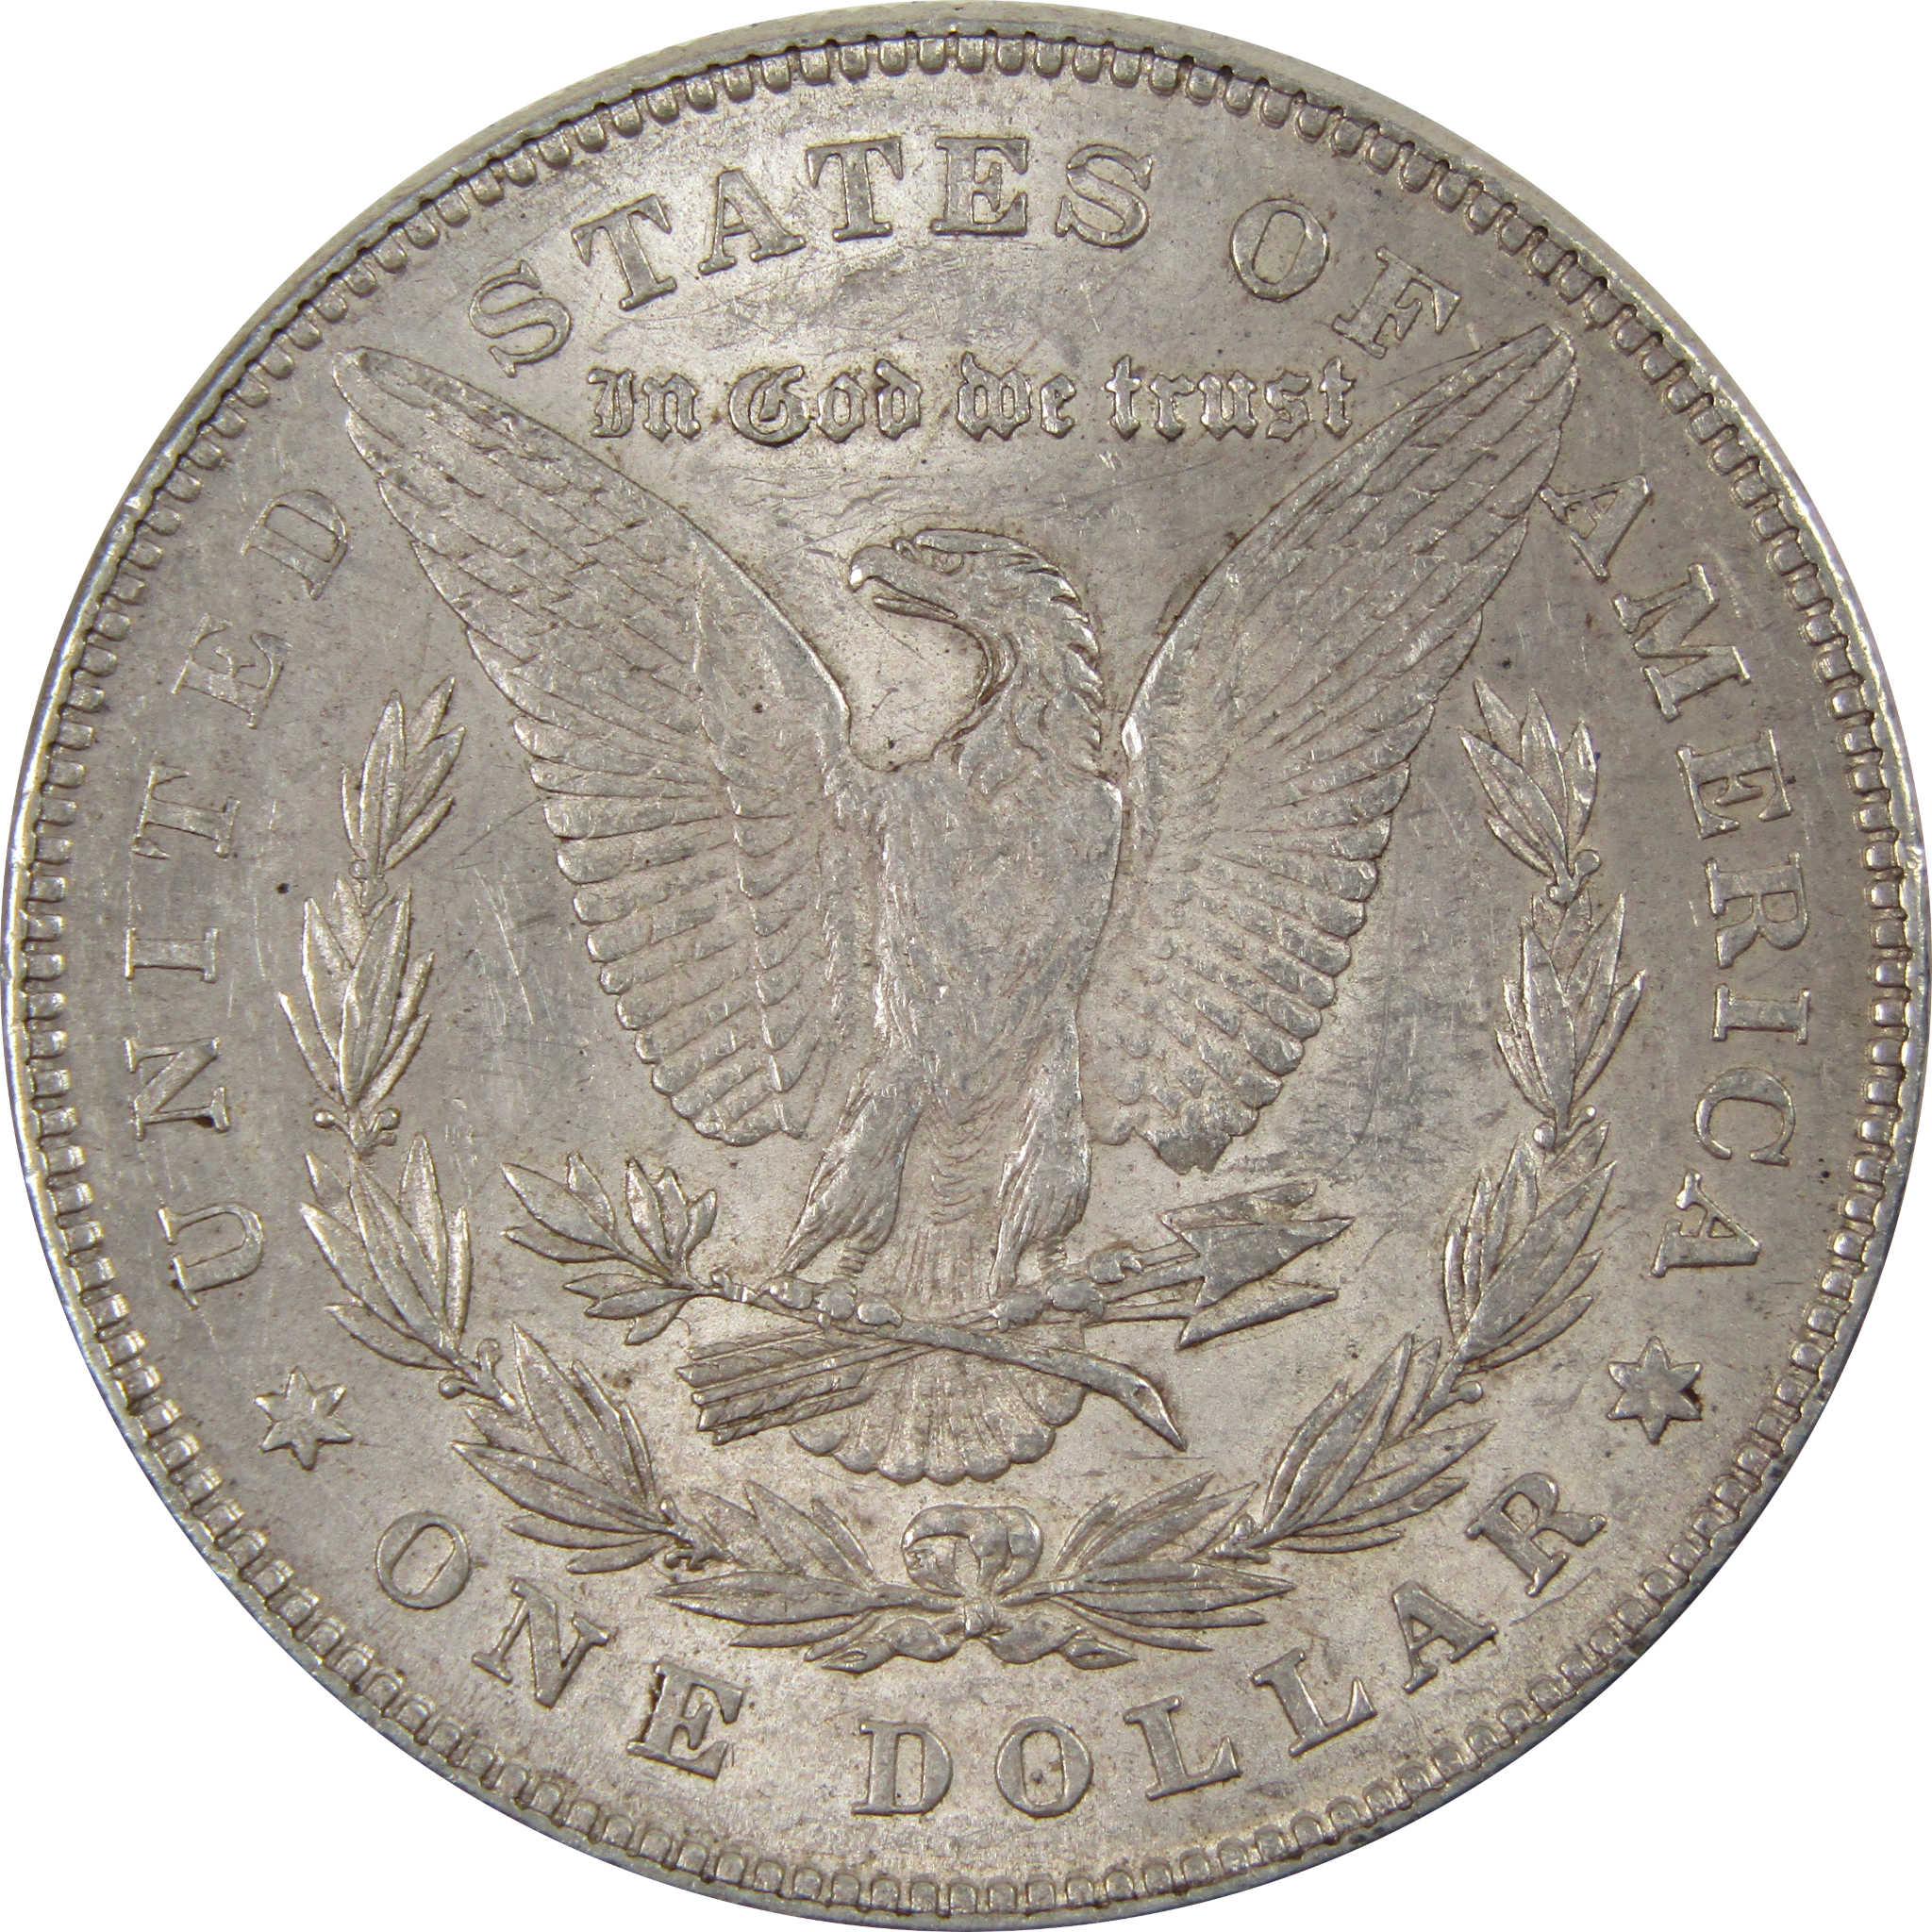 1878 7TF Rev 78 Morgan Dollar About Uncirculated 90% Silver SKU:I7903 - Morgan coin - Morgan silver dollar - Morgan silver dollar for sale - Profile Coins &amp; Collectibles